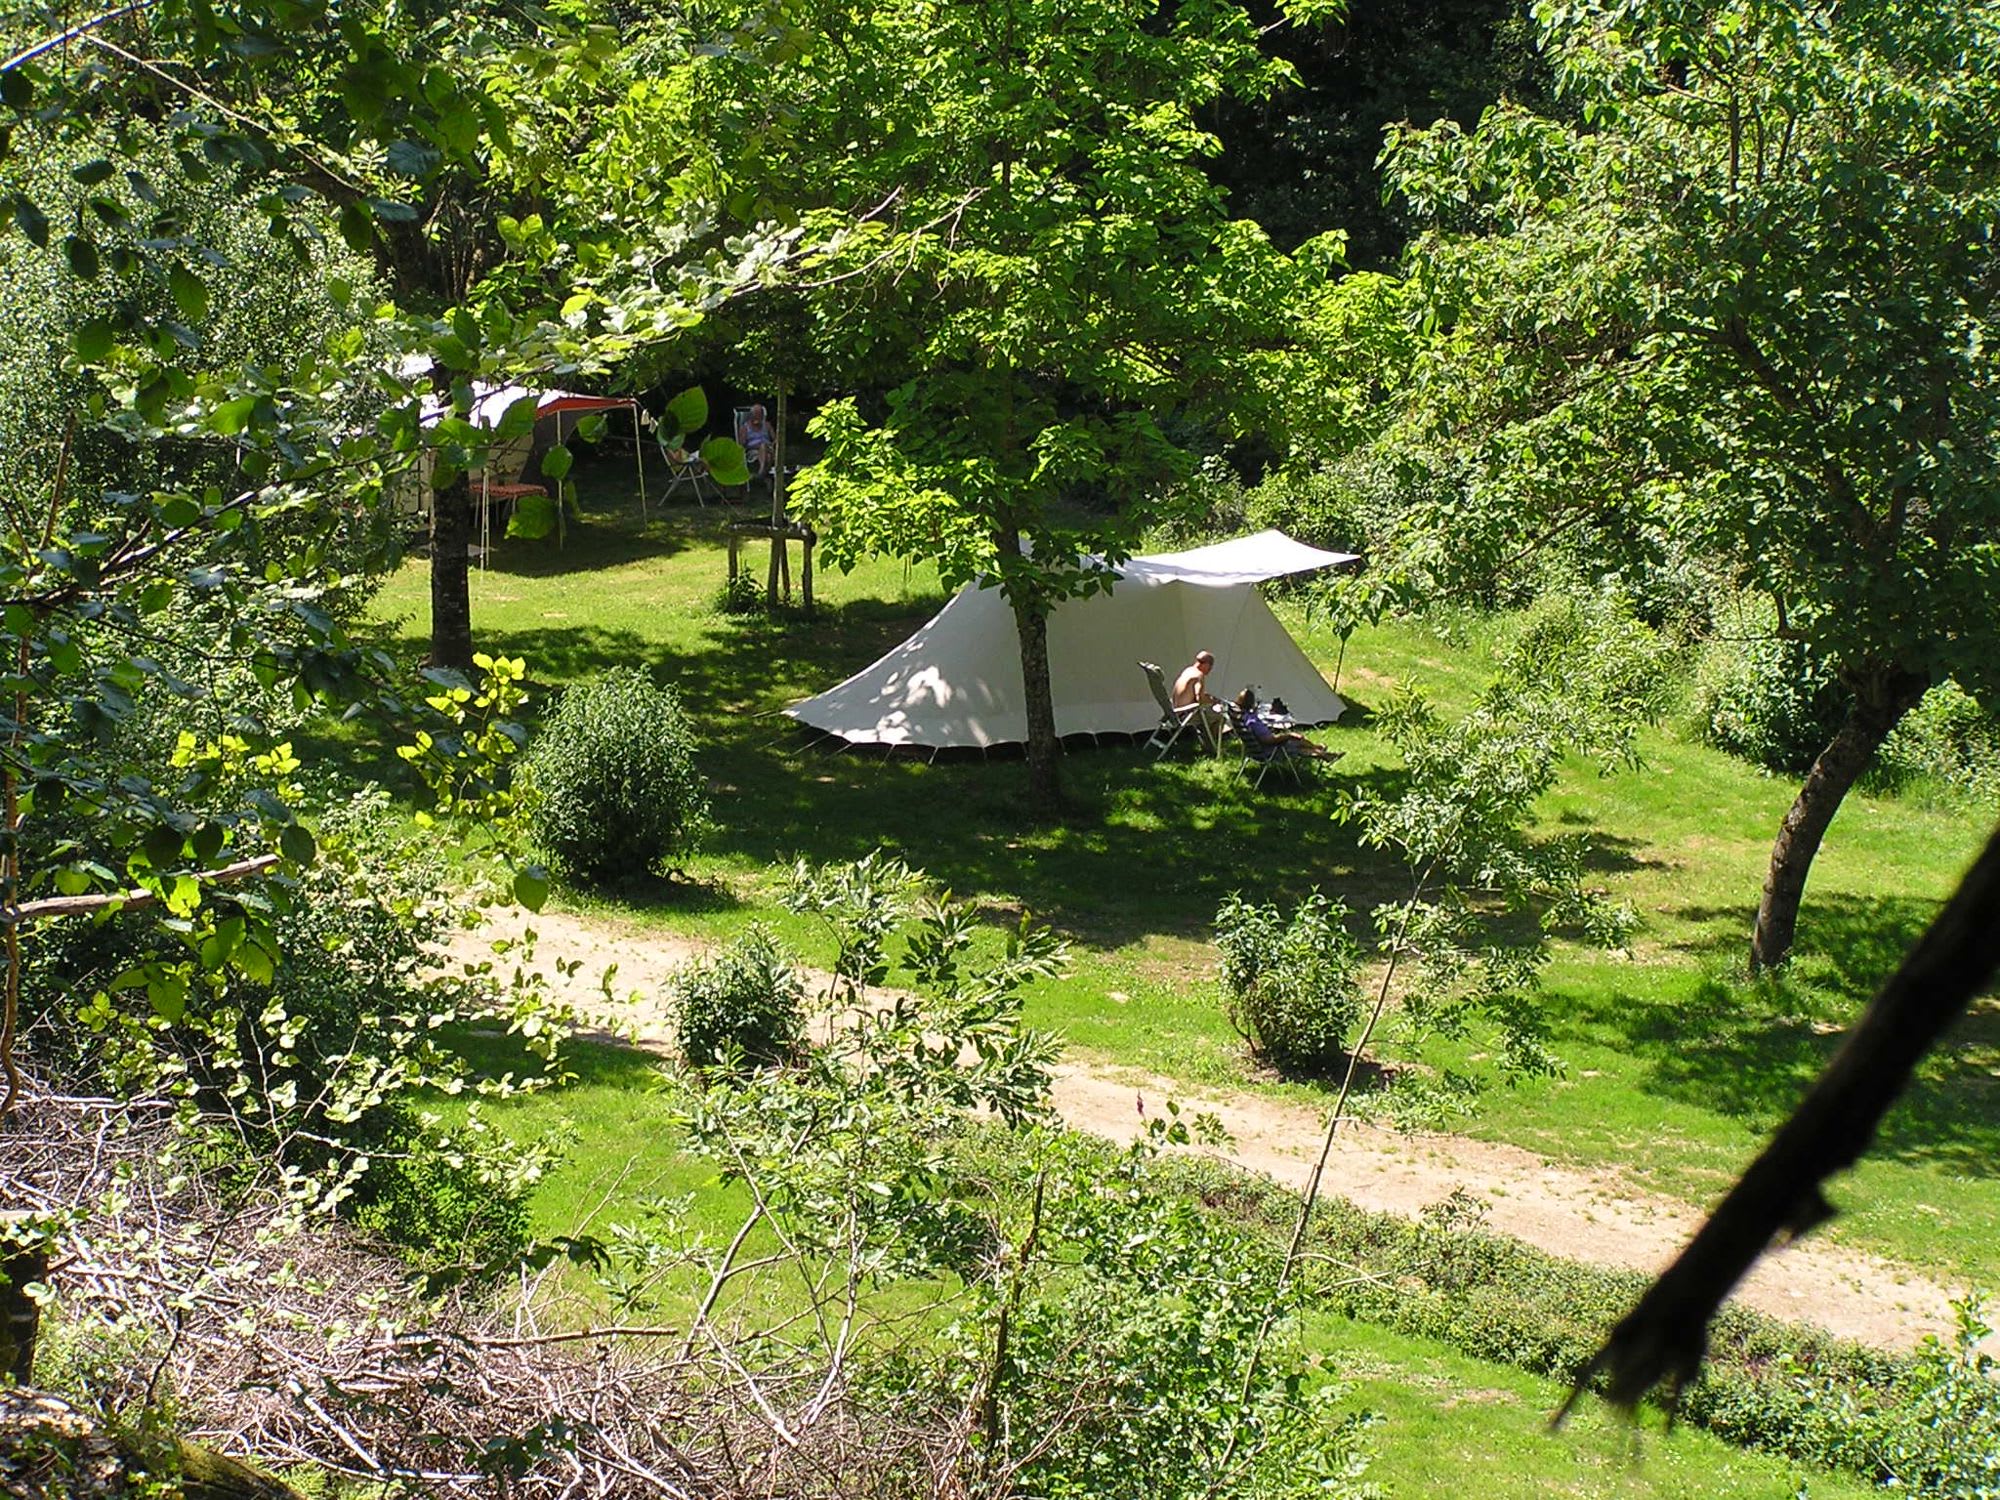 Moulin de Liort: A wonderfully hidden, family-friendly, riverside campsite with space for just a handful of lucky campers.